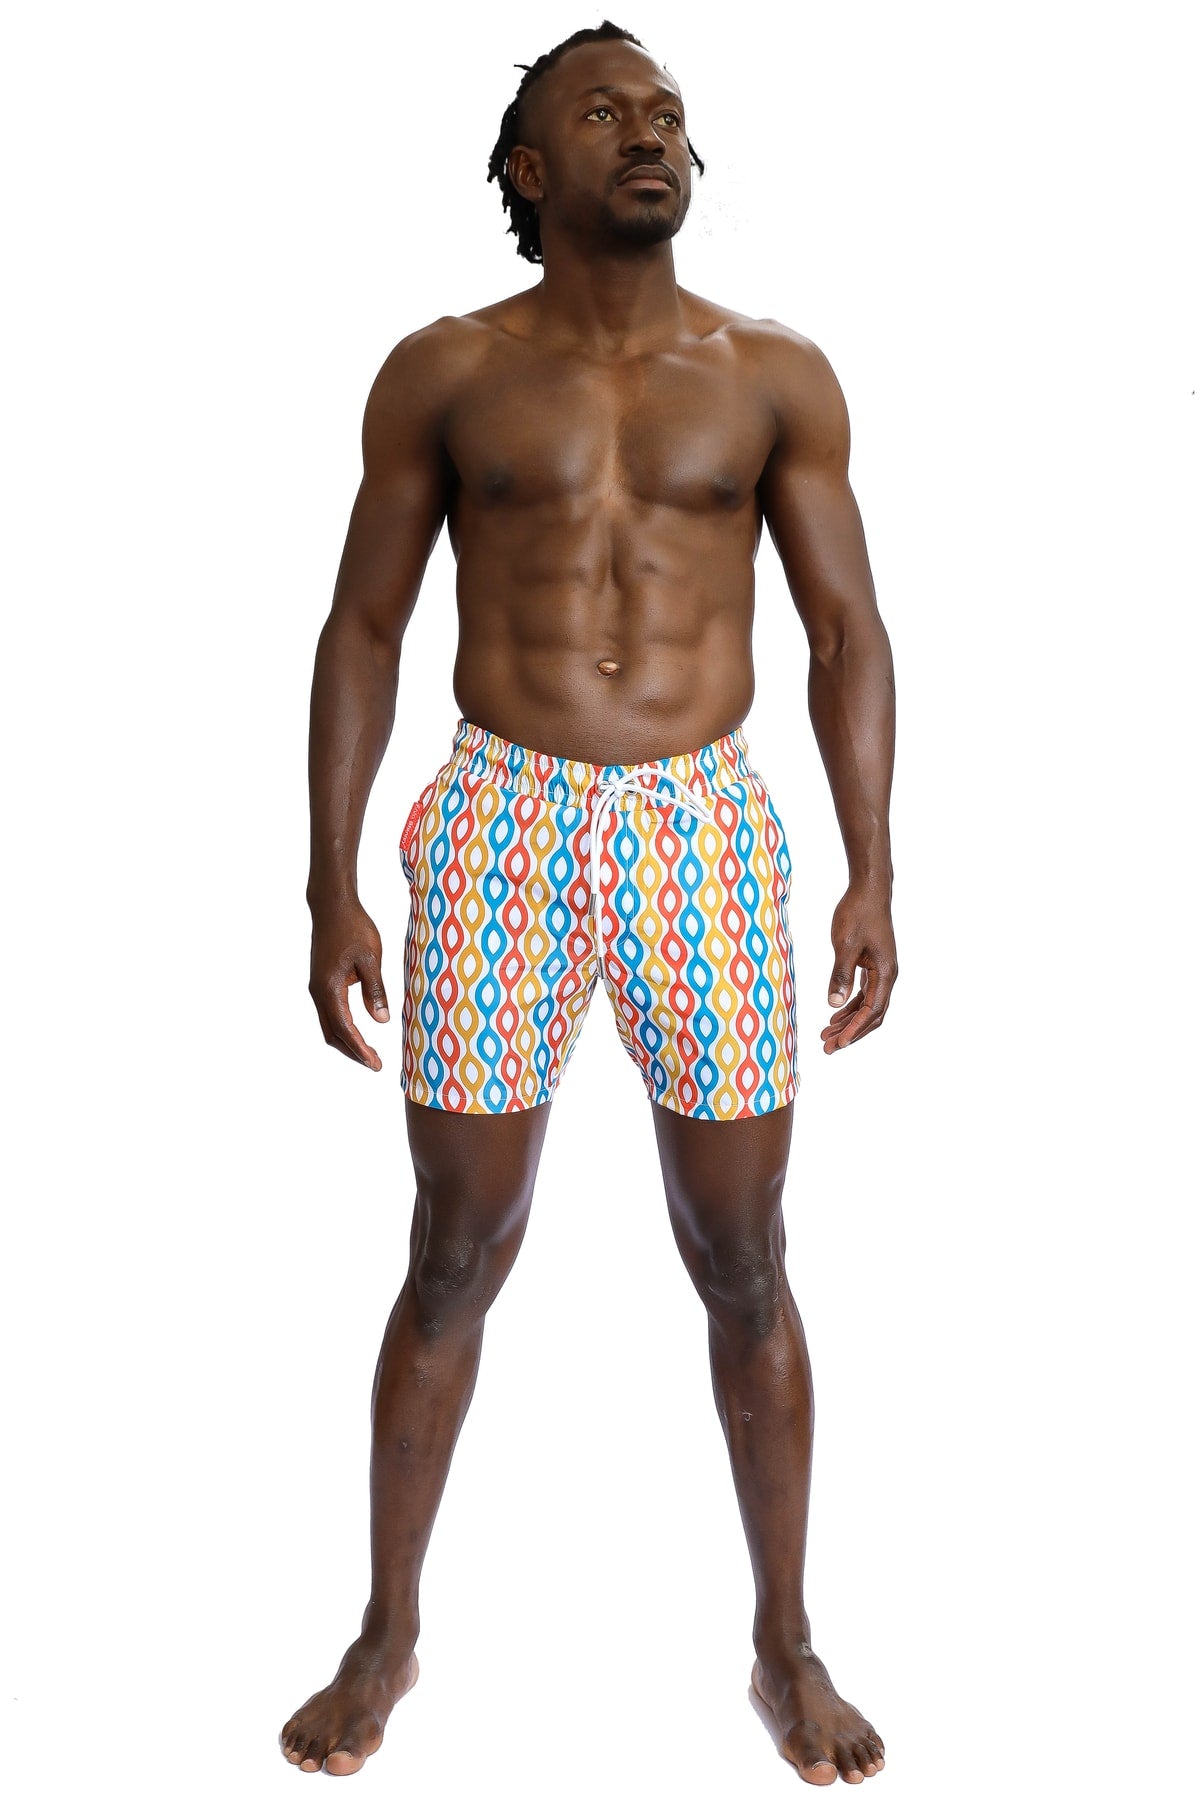 Men's Patterned Colorful Sea Shorts